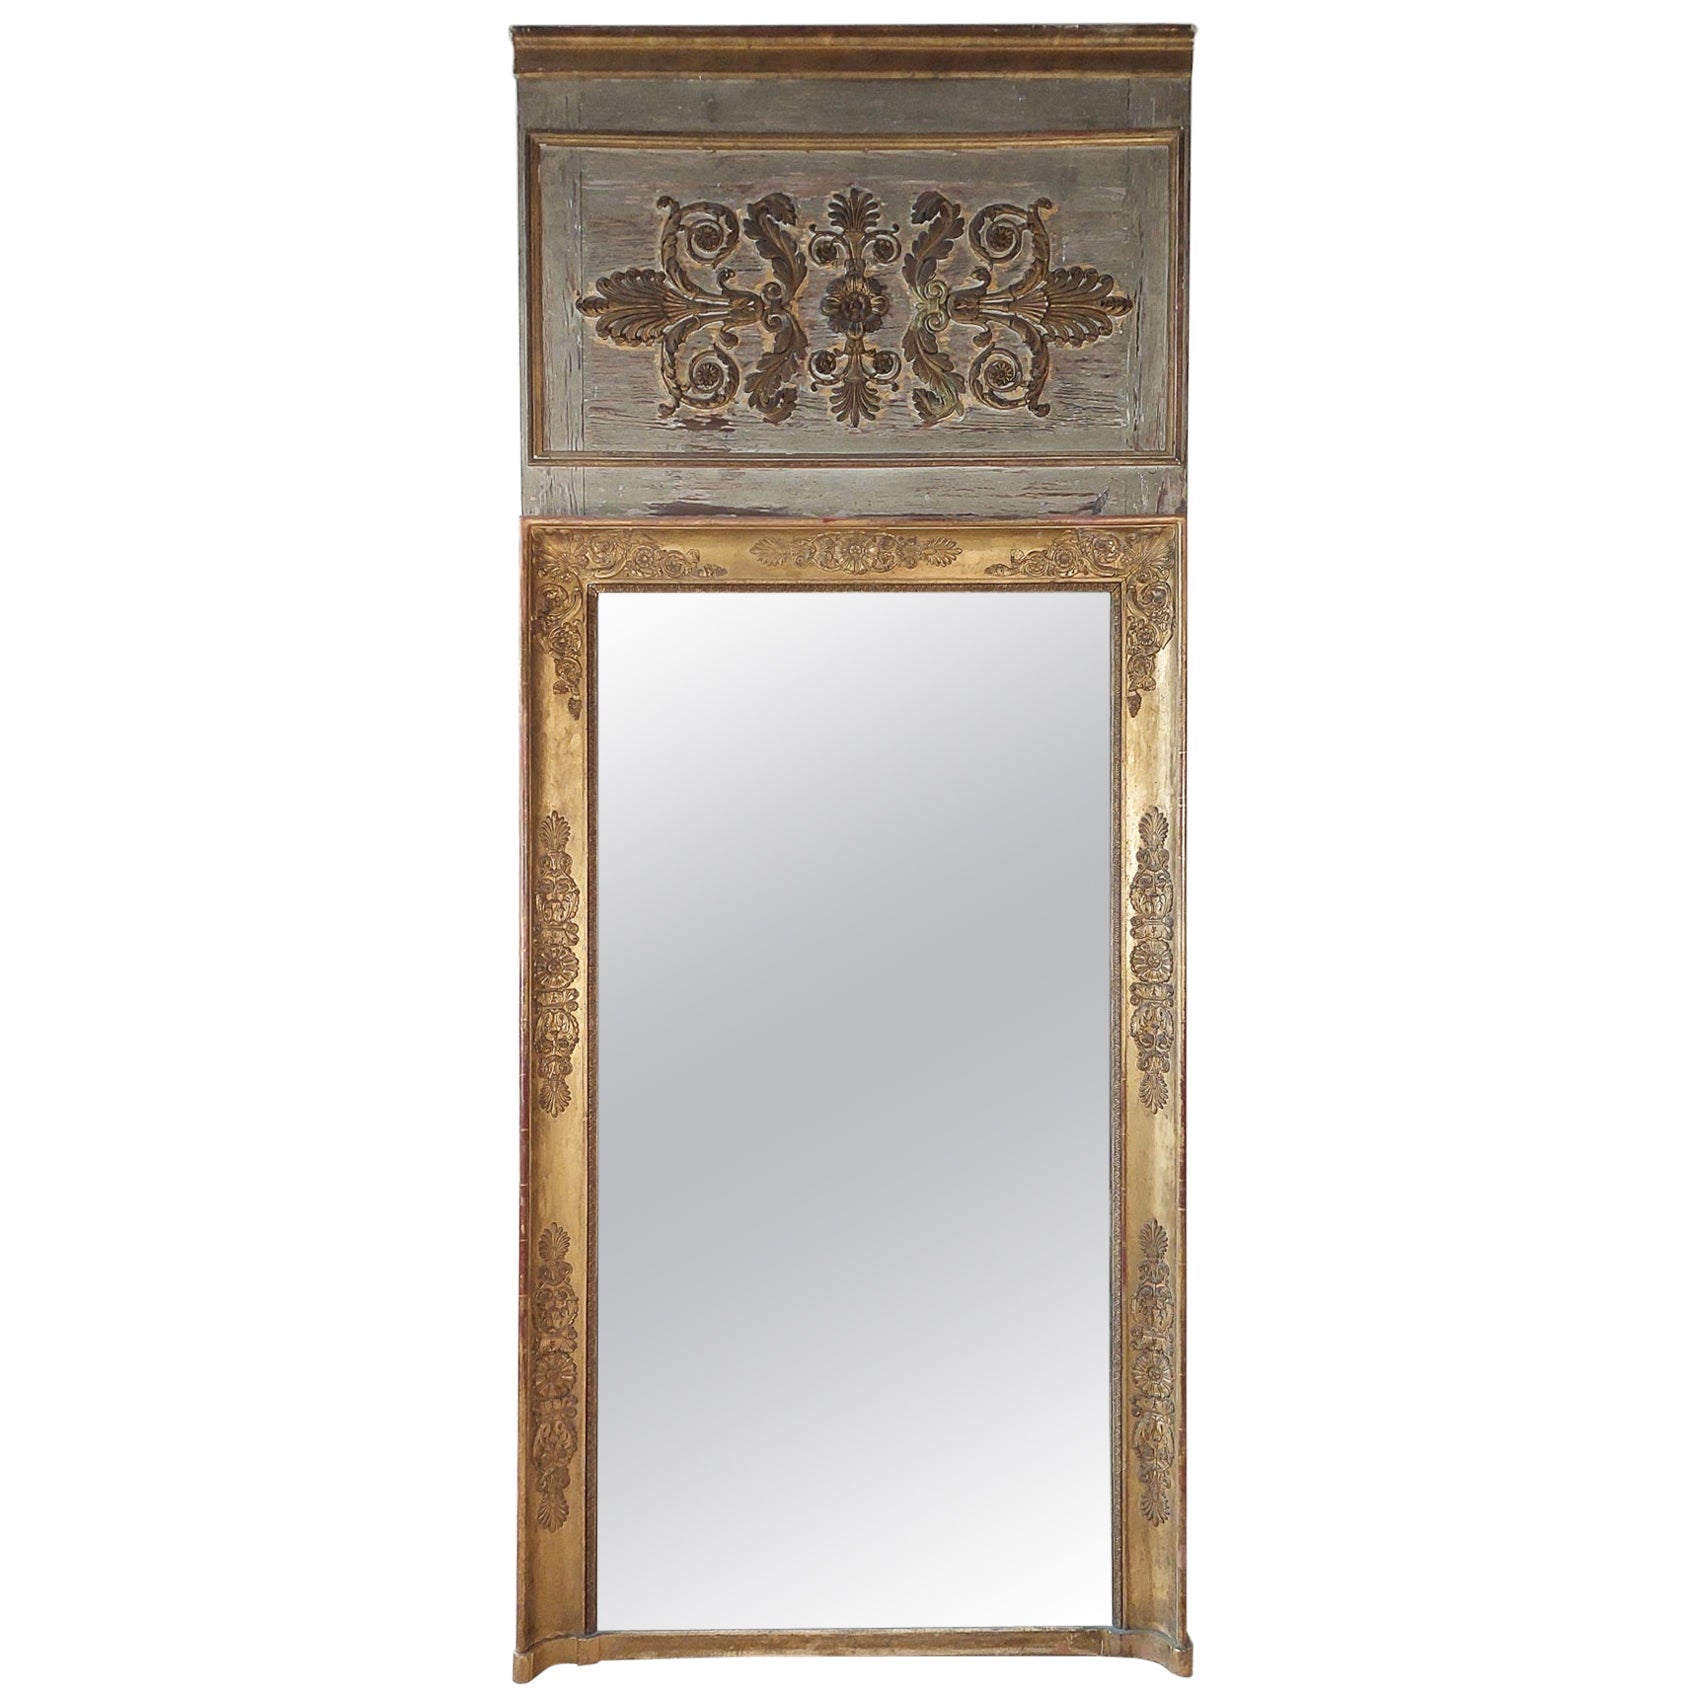 Antique Carved and Gilt Wood Empire Trumeau Mirror from ± 1800 - 1820